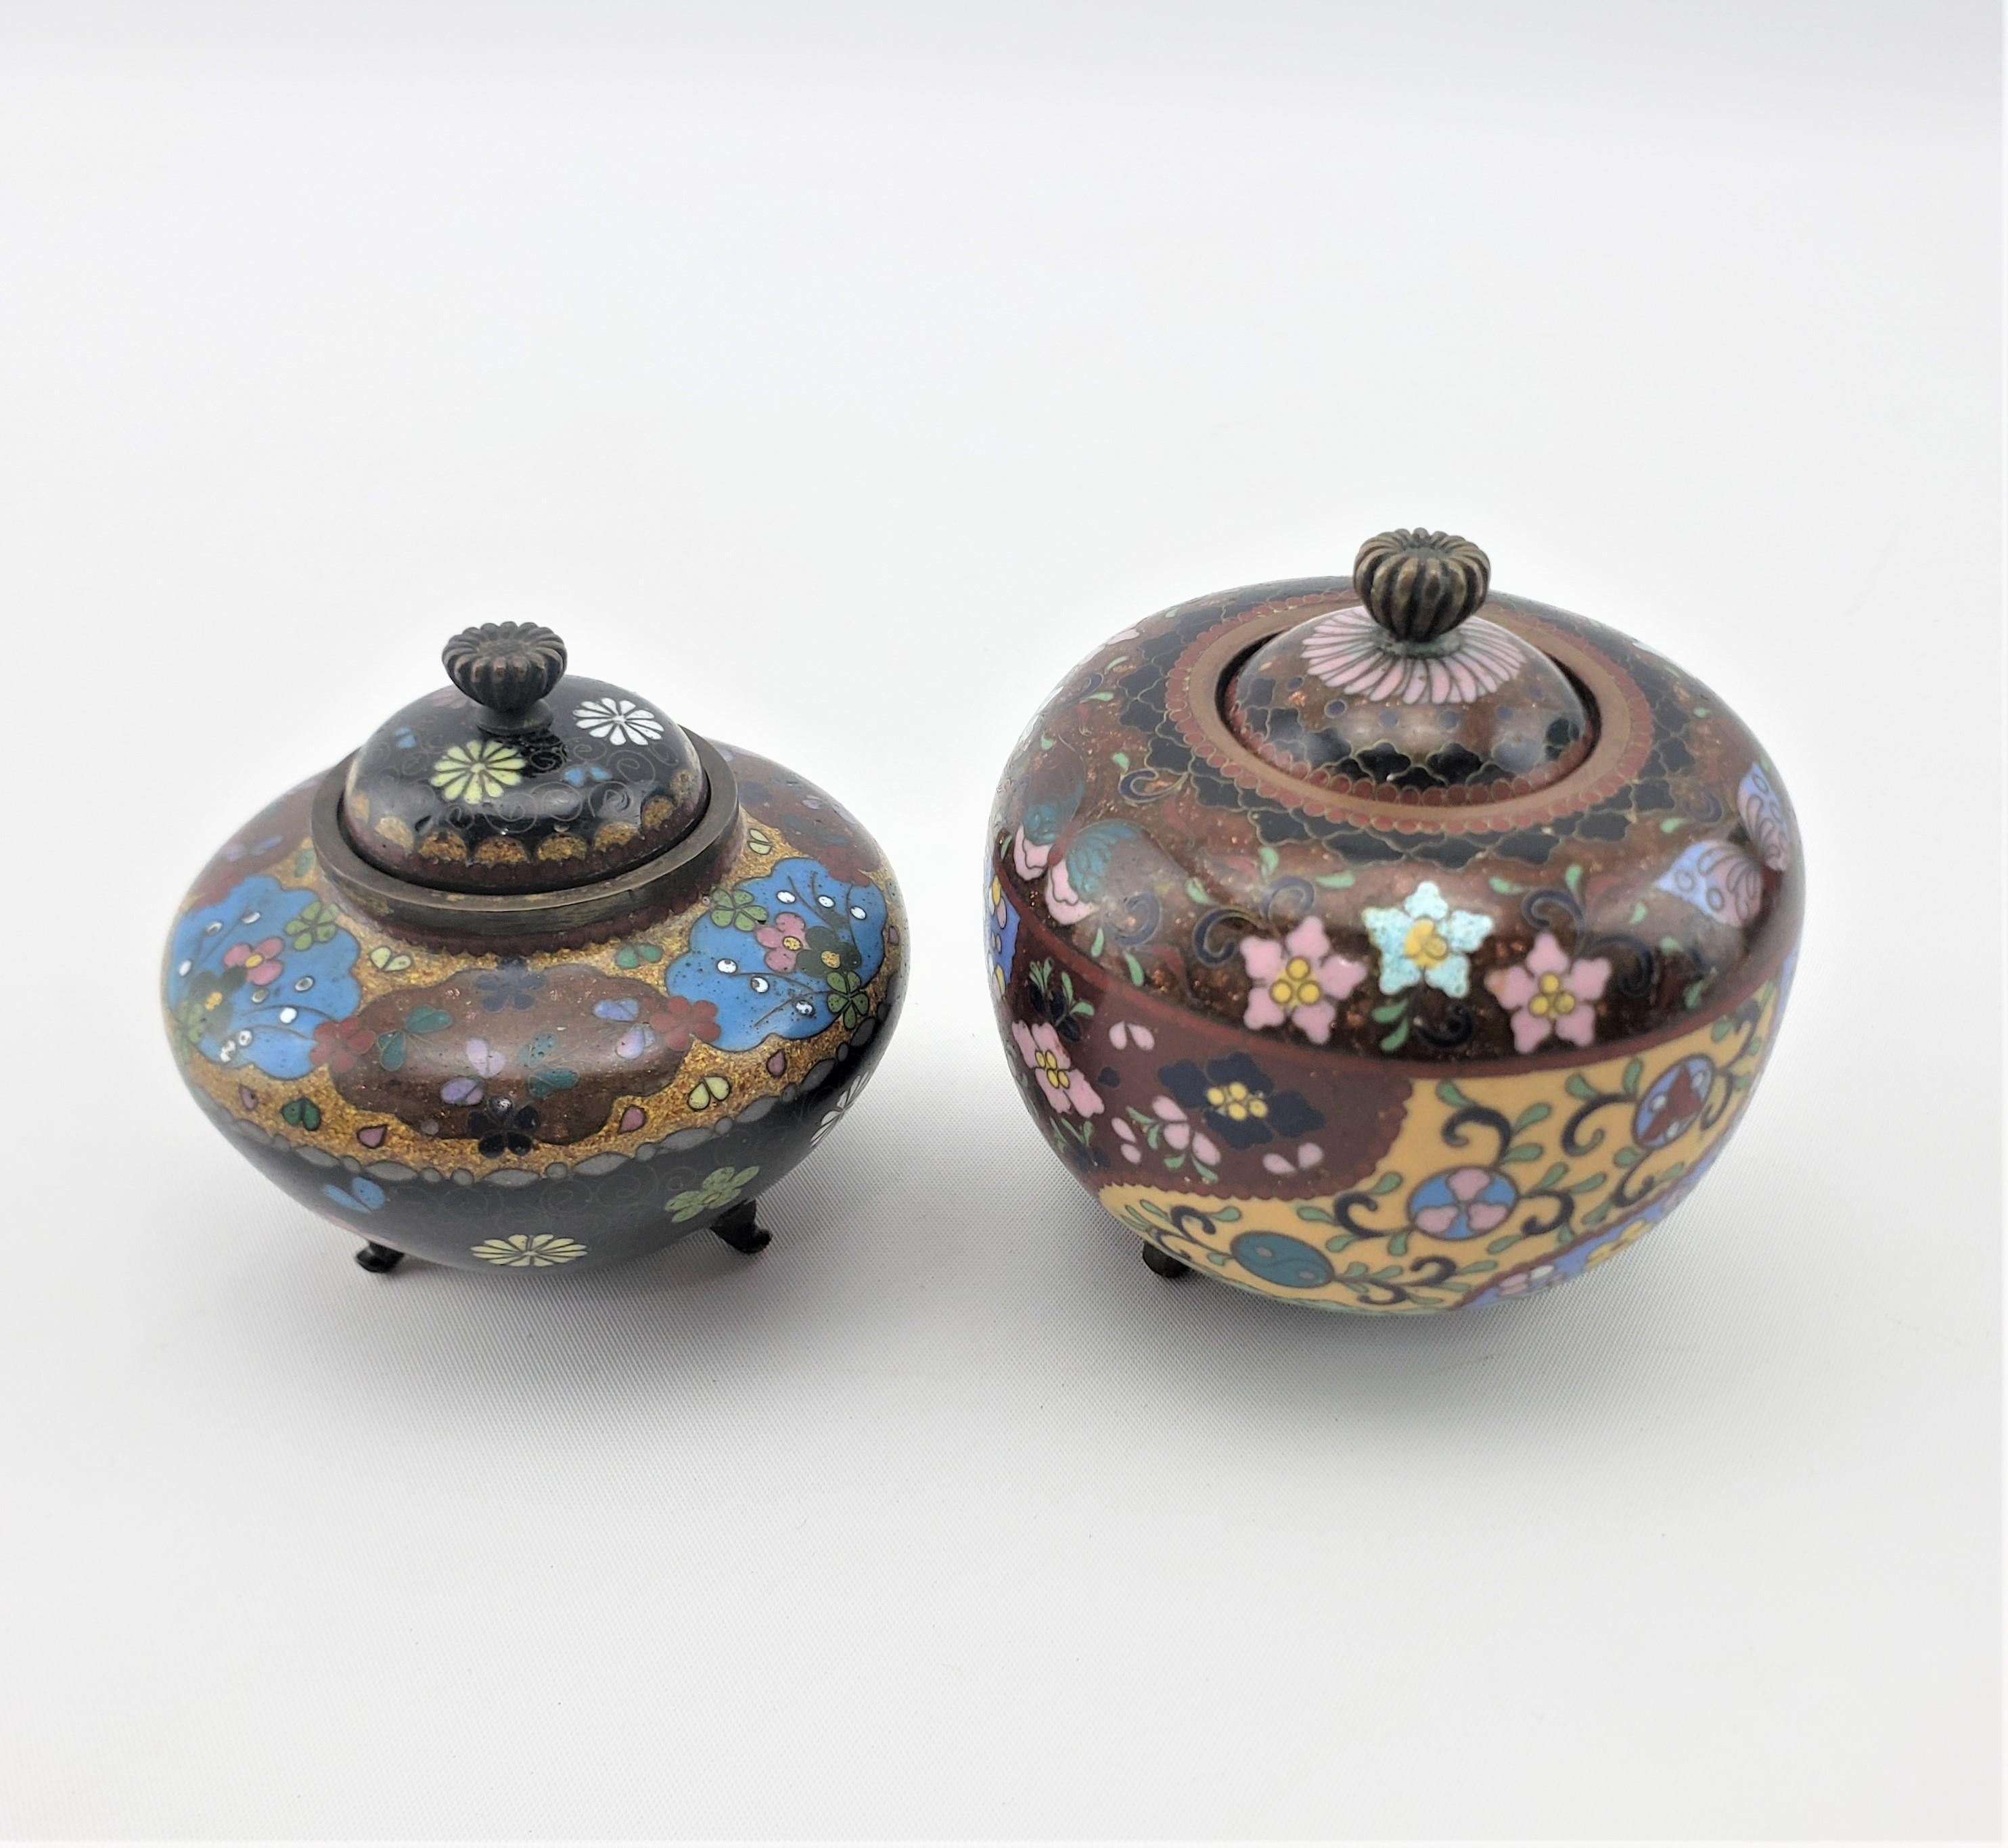 Hand-Crafted Pair of Antique Japanese Cloisonne Covered Jars with Floral Motif Decoration For Sale